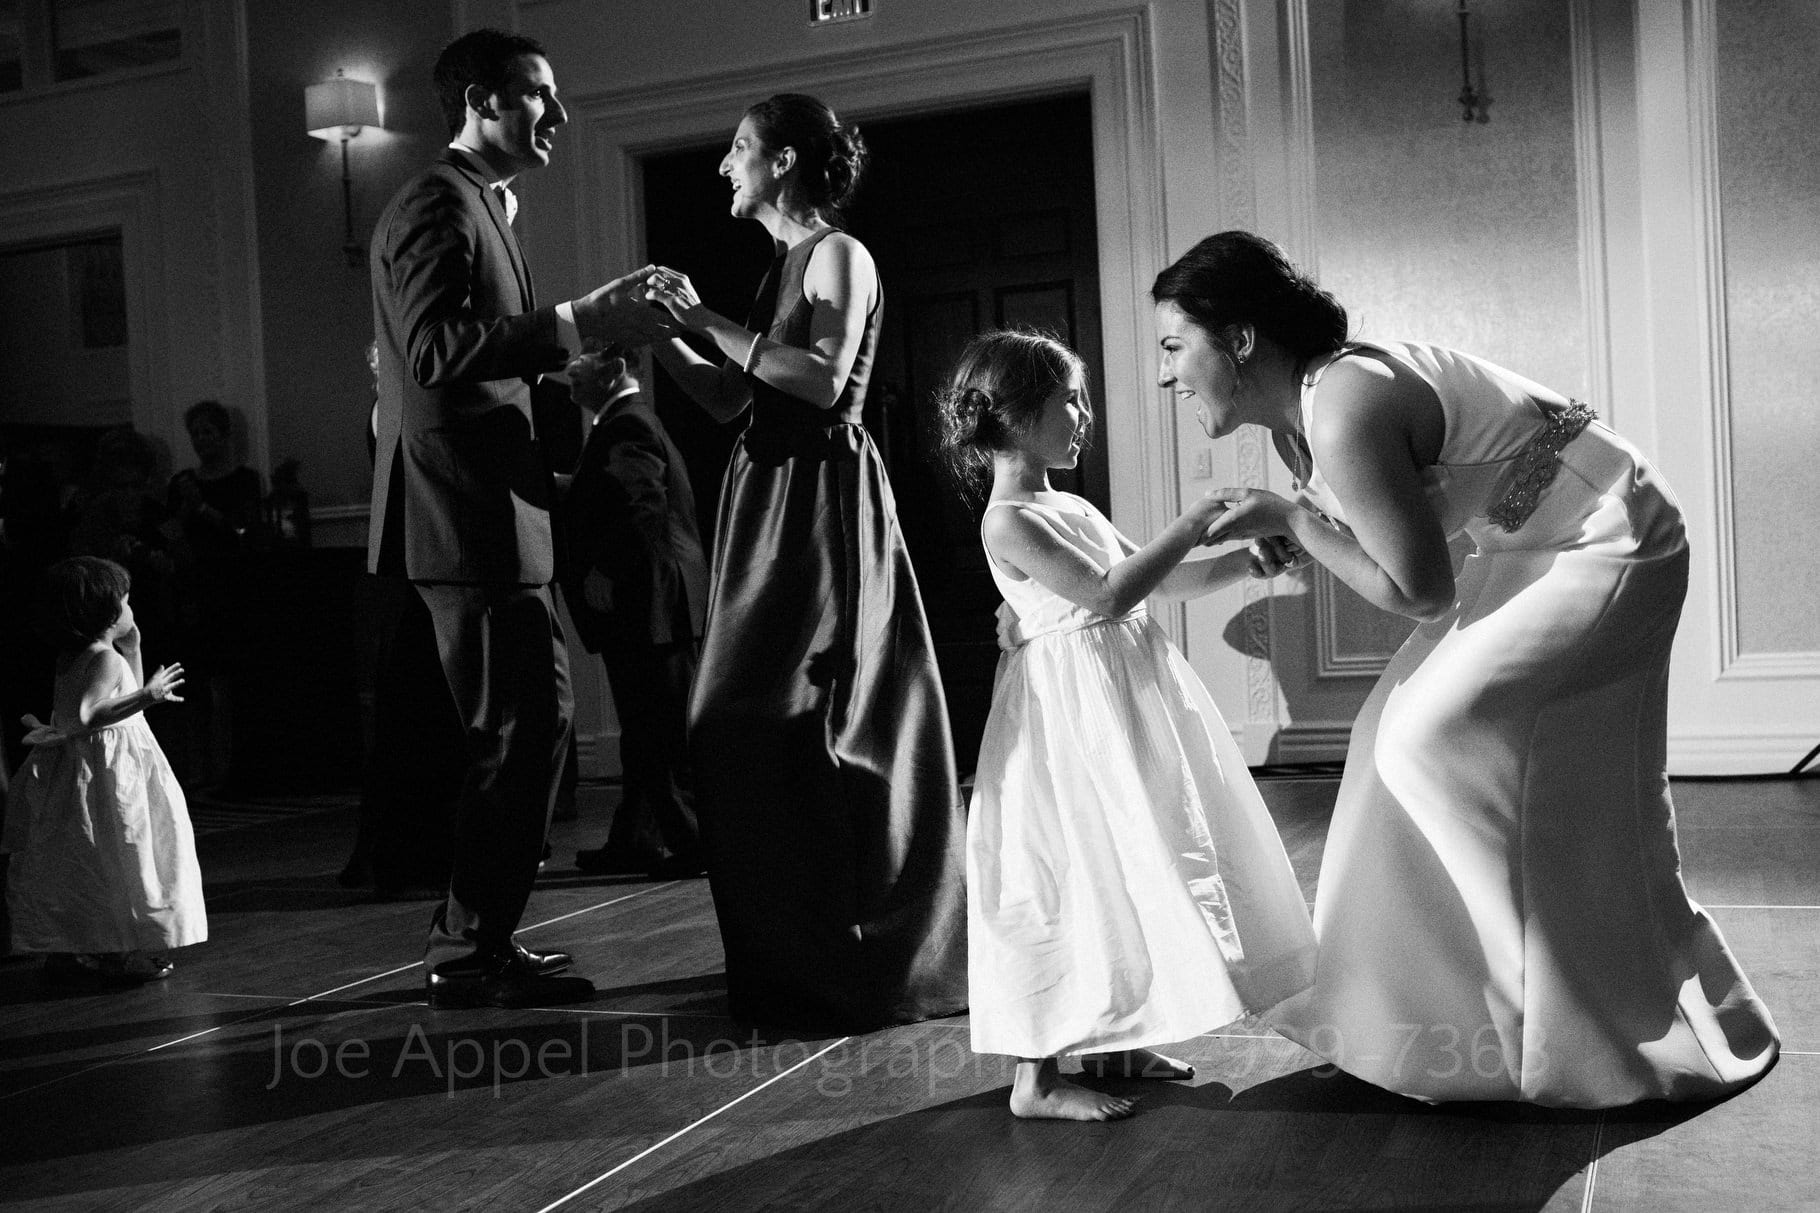 A bride bends down as she dances with a little girl. The groom dances with his sister behind them.